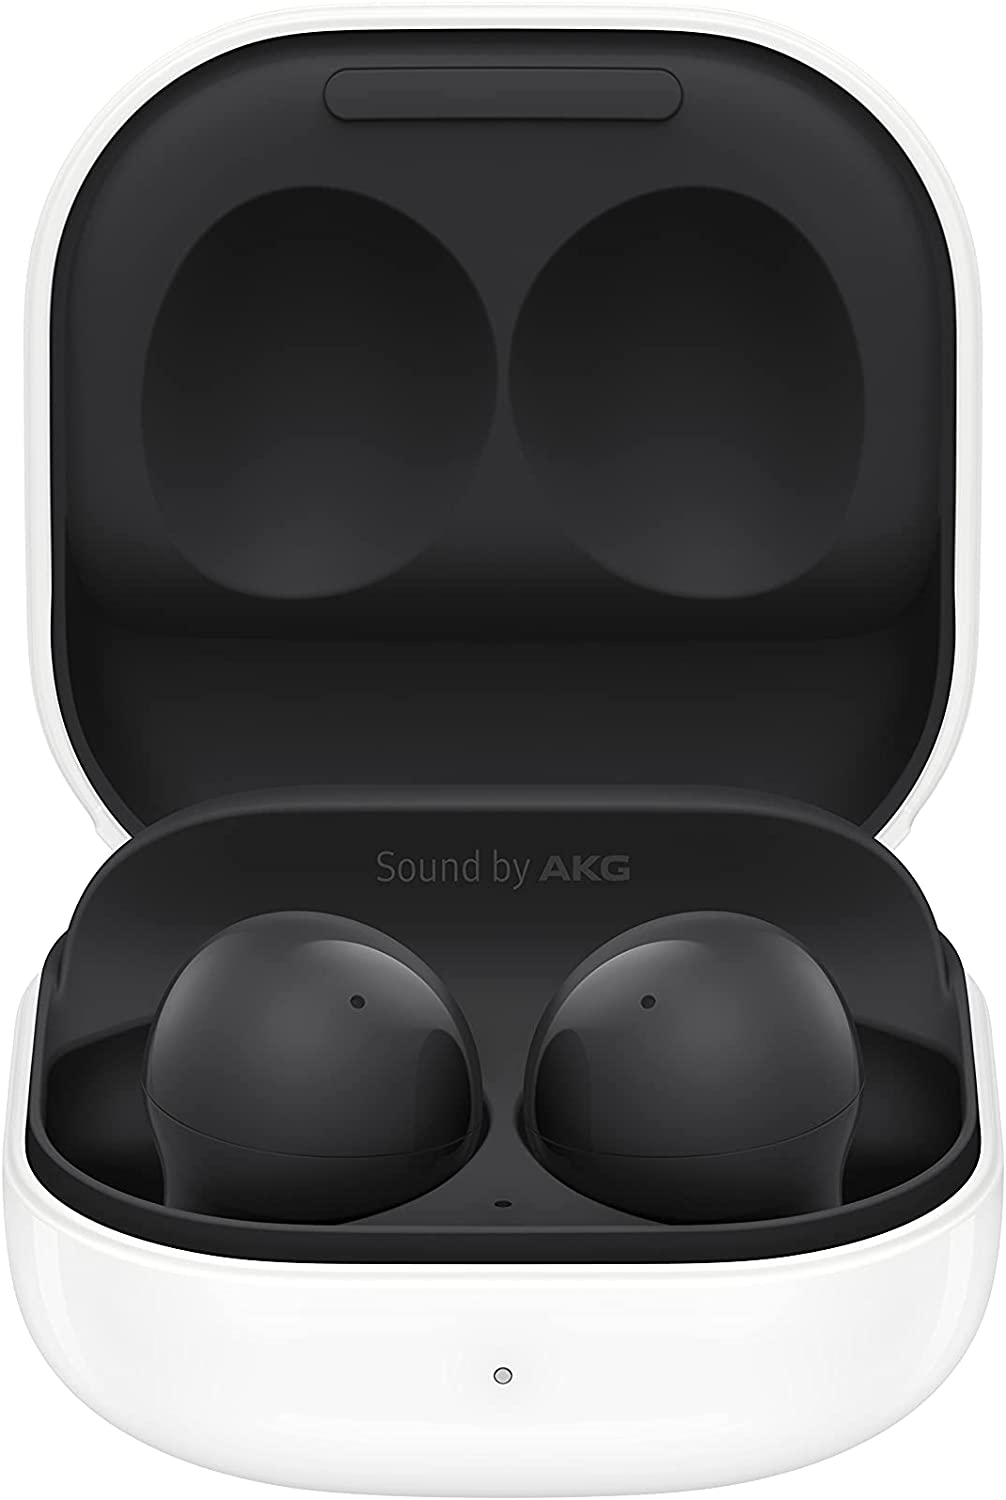 Samsung Galaxy Buds 2 True Wireless Noise Cancelling Bluetooth Earbuds -Graphite (New)